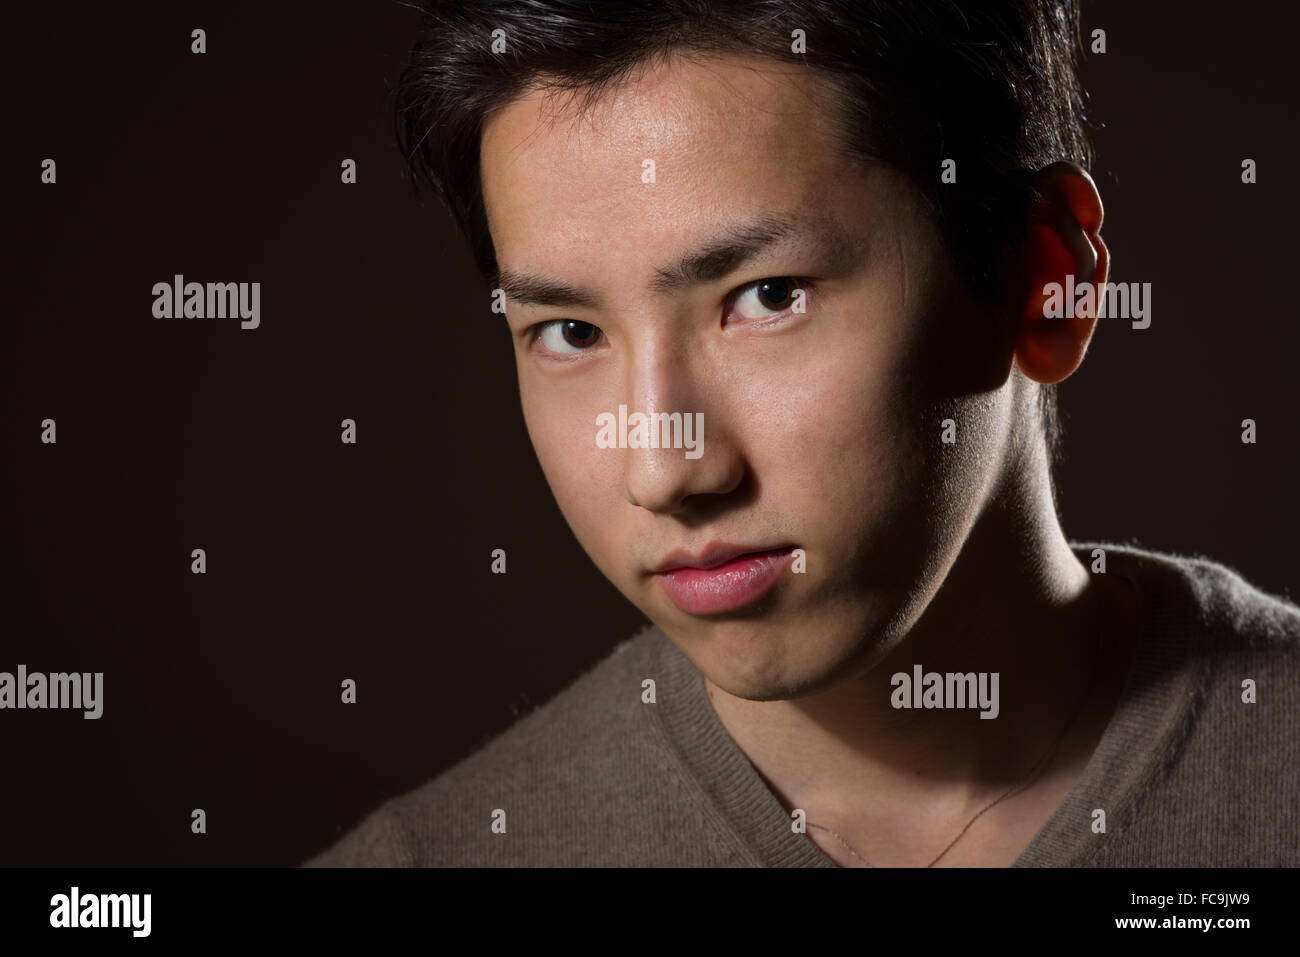 A headshot of a young handsome Japanese man. Stock Photo